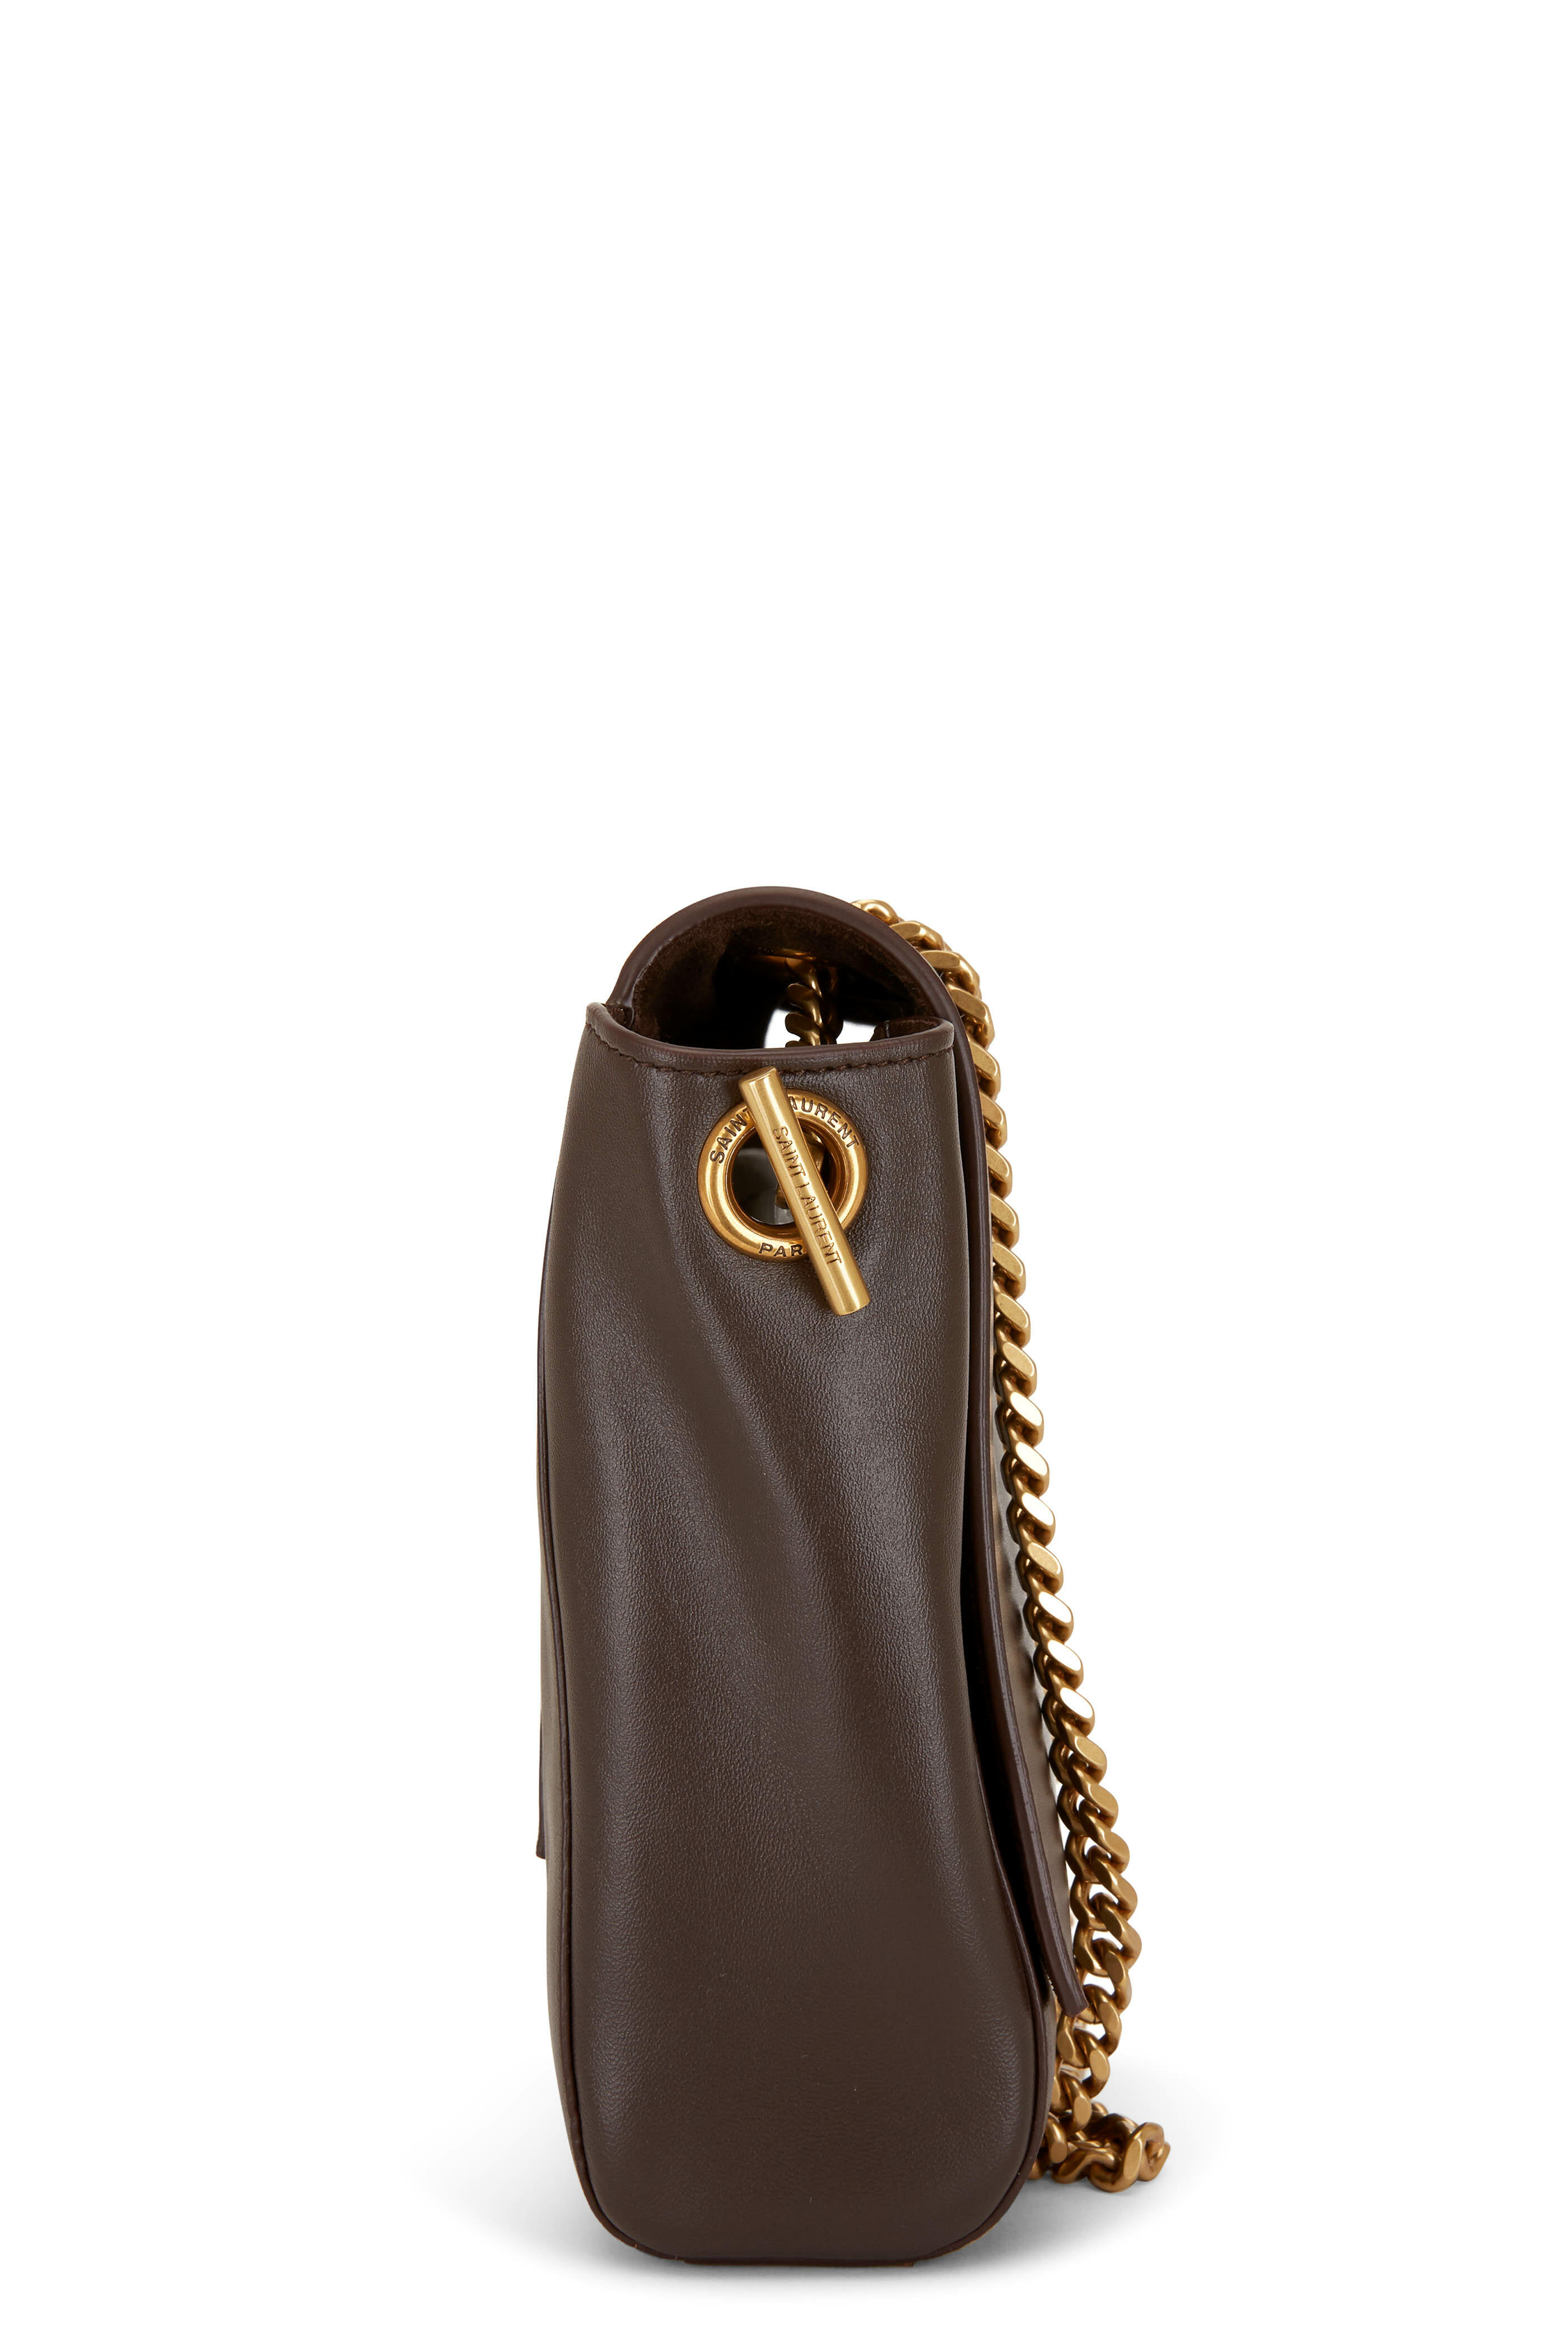 Mulberry Brass Chain Bag Strap, Gold